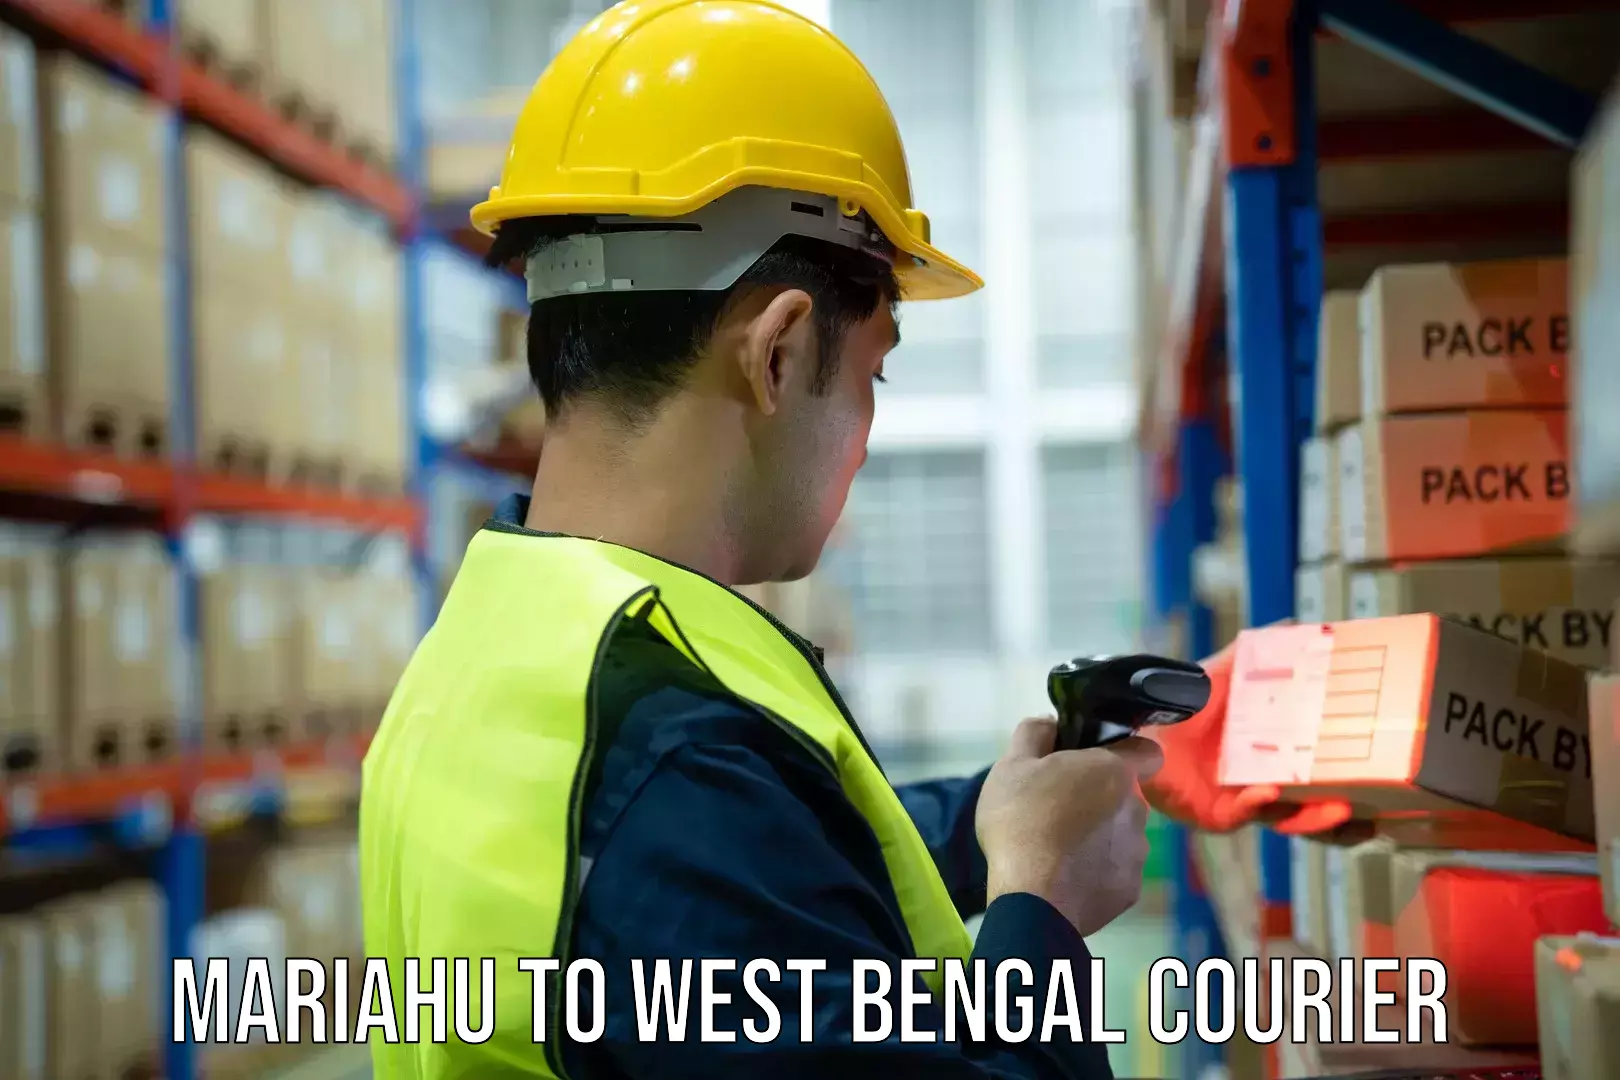 Subscription-based courier Mariahu to West Bengal